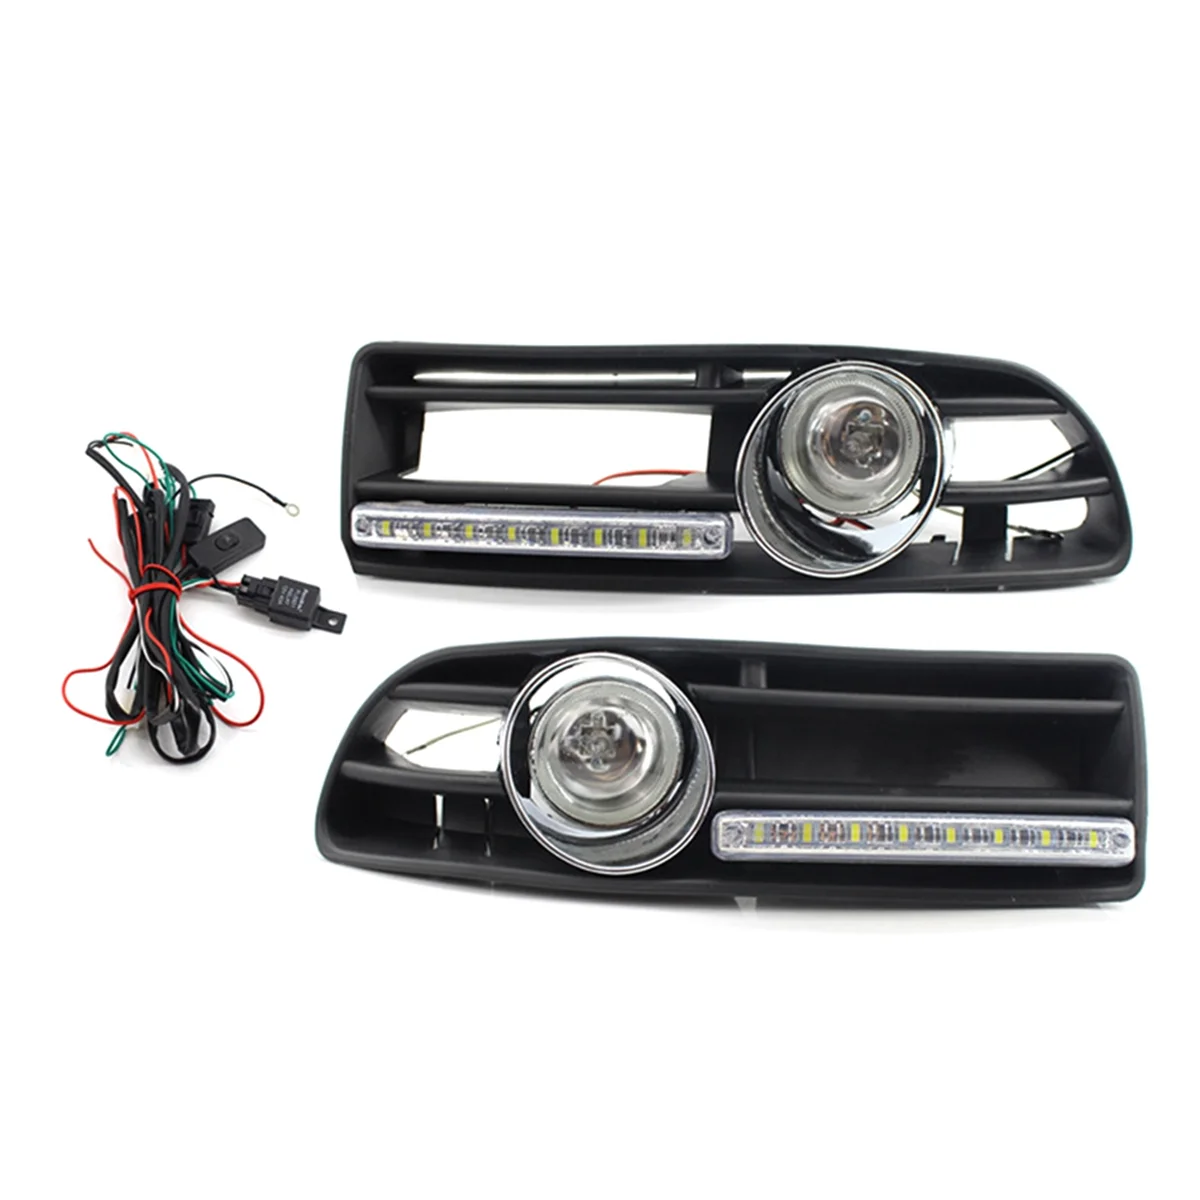 

Front Fog Lights Assembly with Switch Harness Fog Lamp Grille Daytime Running Light for VW Bora Jetta MK4 1998-2004